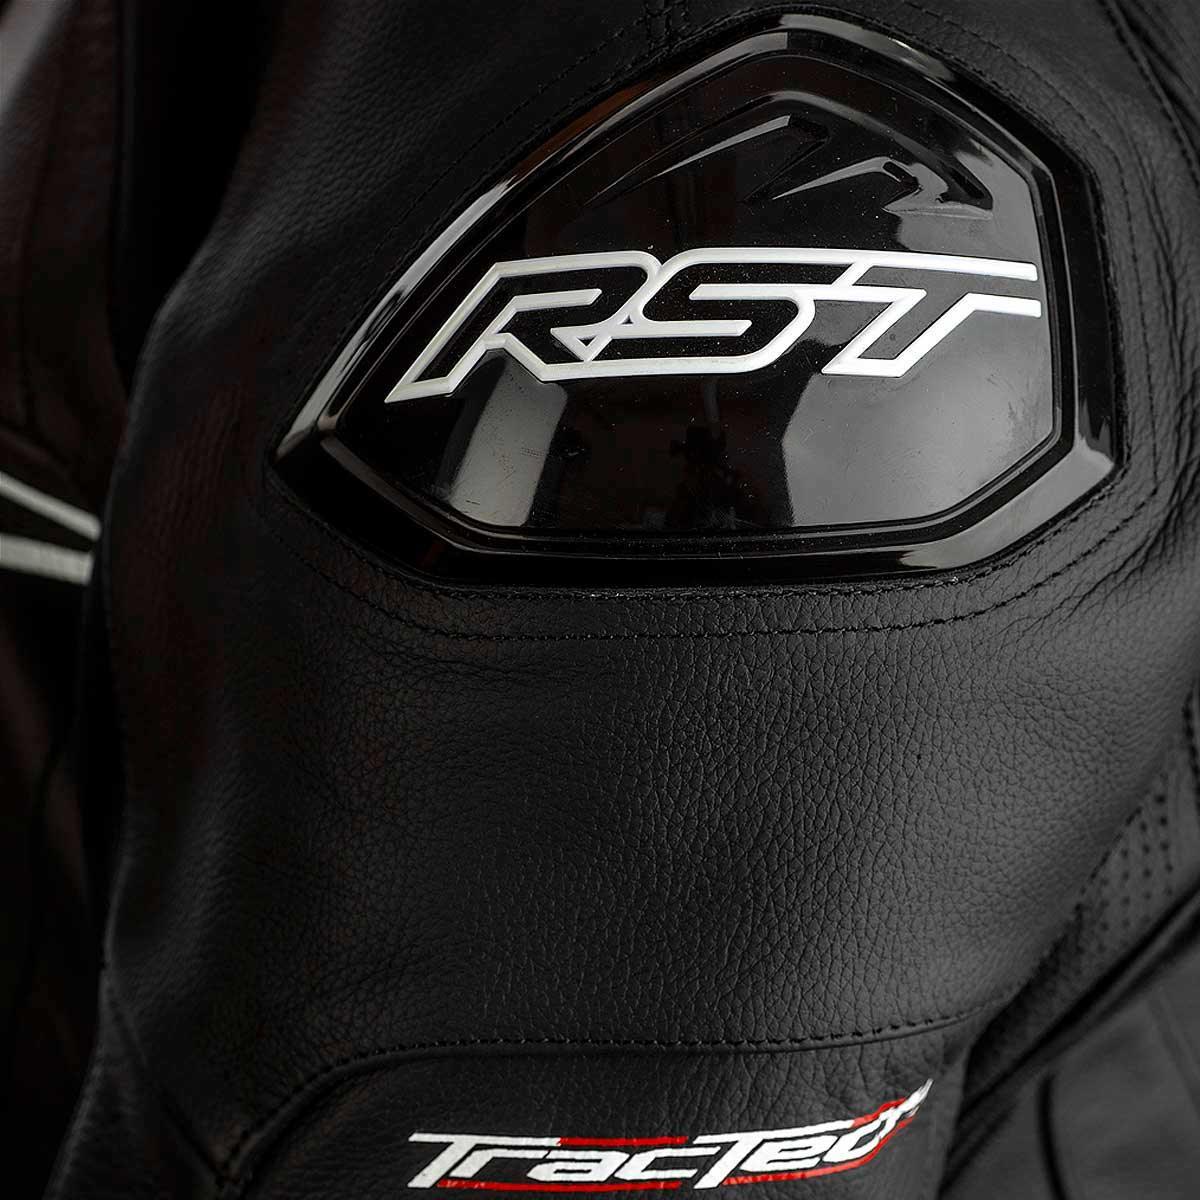 RST TracTech Evo 4 Leather Jacket CE Black - Motorcycle Leathers